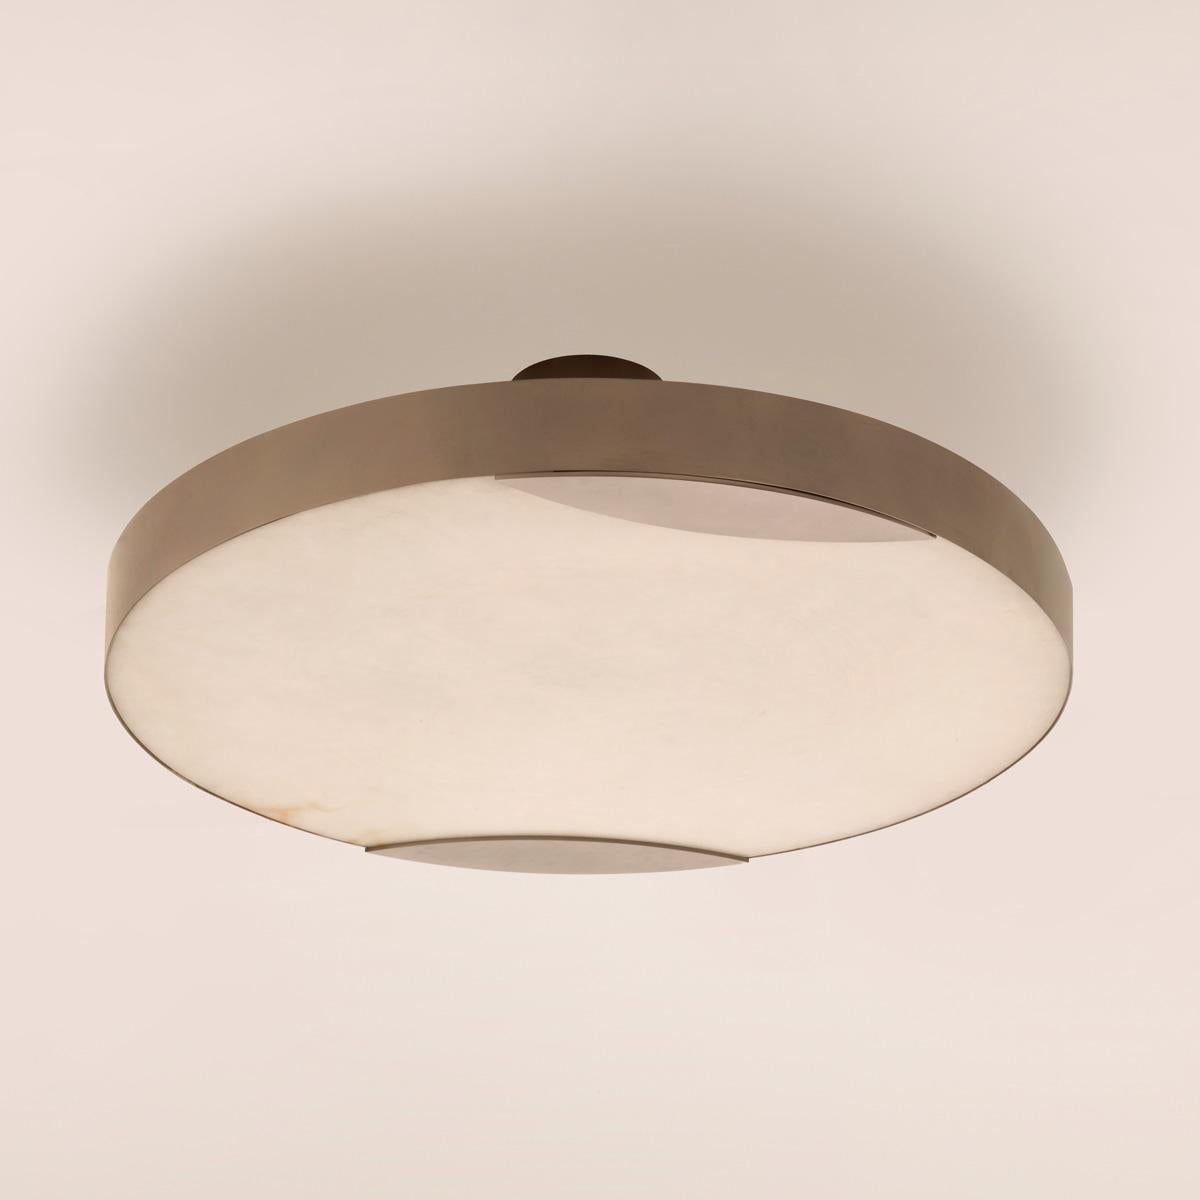 Cloud N.1 Ceiling Light by Gaspare Asaro-Polished Nickel Finish In New Condition For Sale In New York, NY